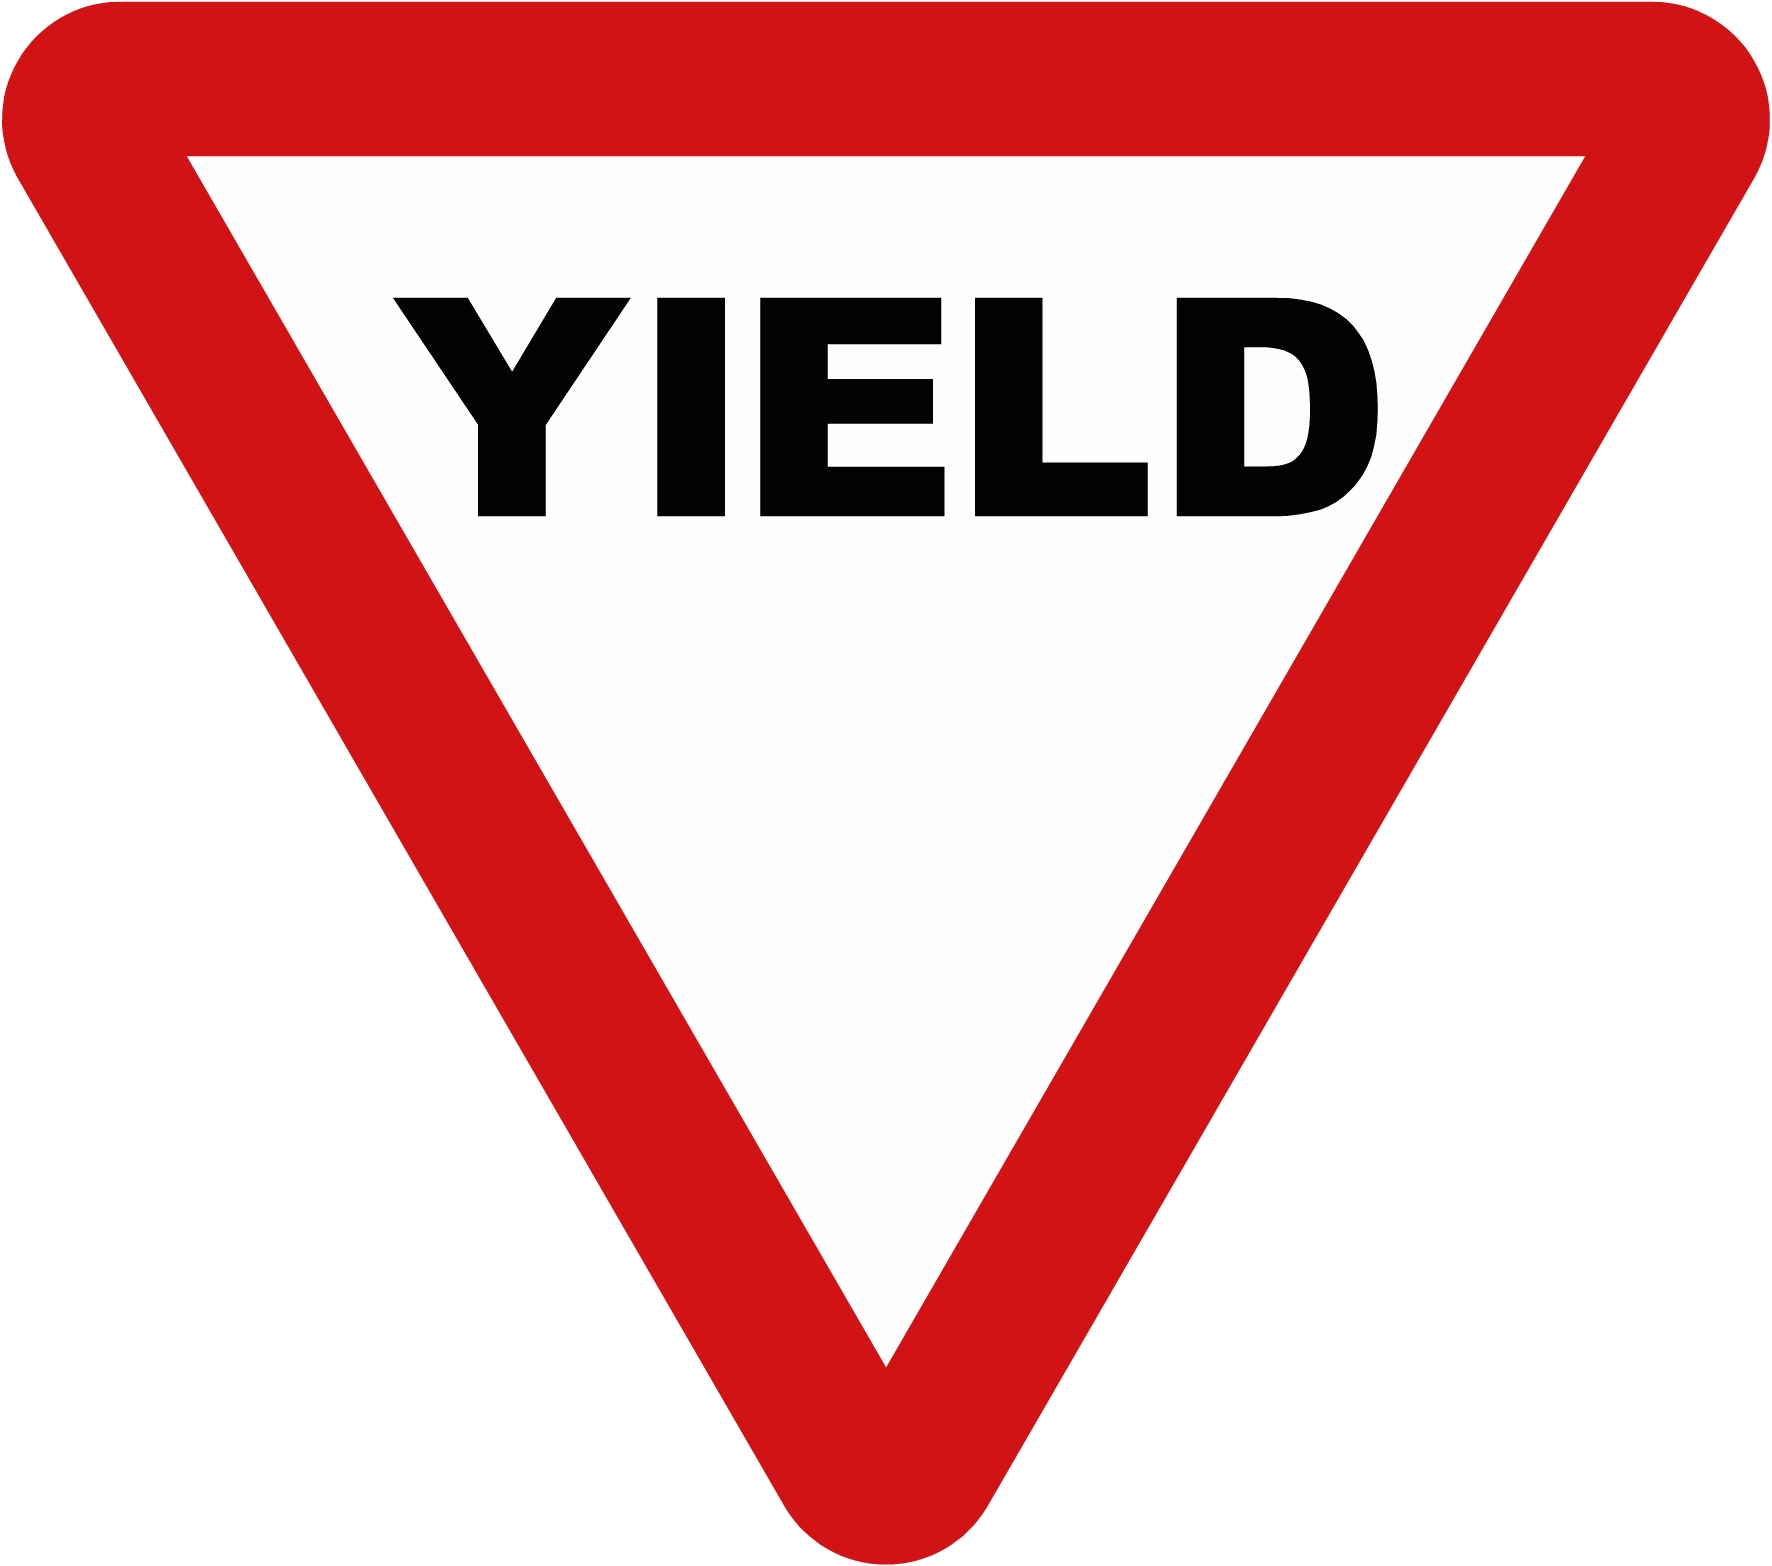 Yellow Yield Sign Clipart   Clipart Panda   Free Clipart Images